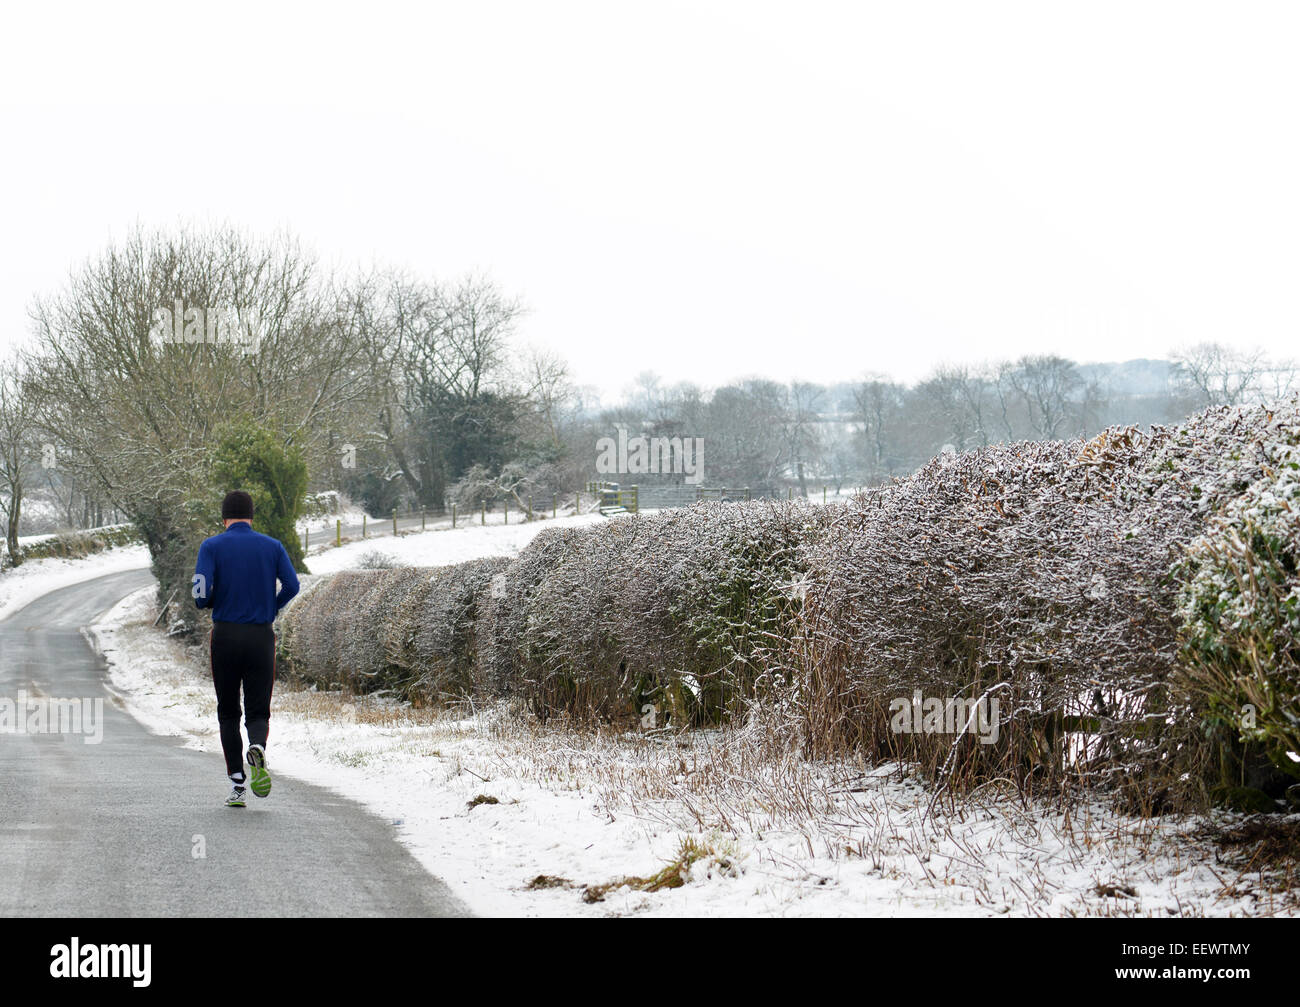 Whashton Green, North Yorkshire, UK. 22nd January, 2015. UK Weather: A jogger runs along a quiet road in North Yorkshire where freezing fog and black ice make it hazardous underfoot. © Robert Smith/Alamy Stock Photo